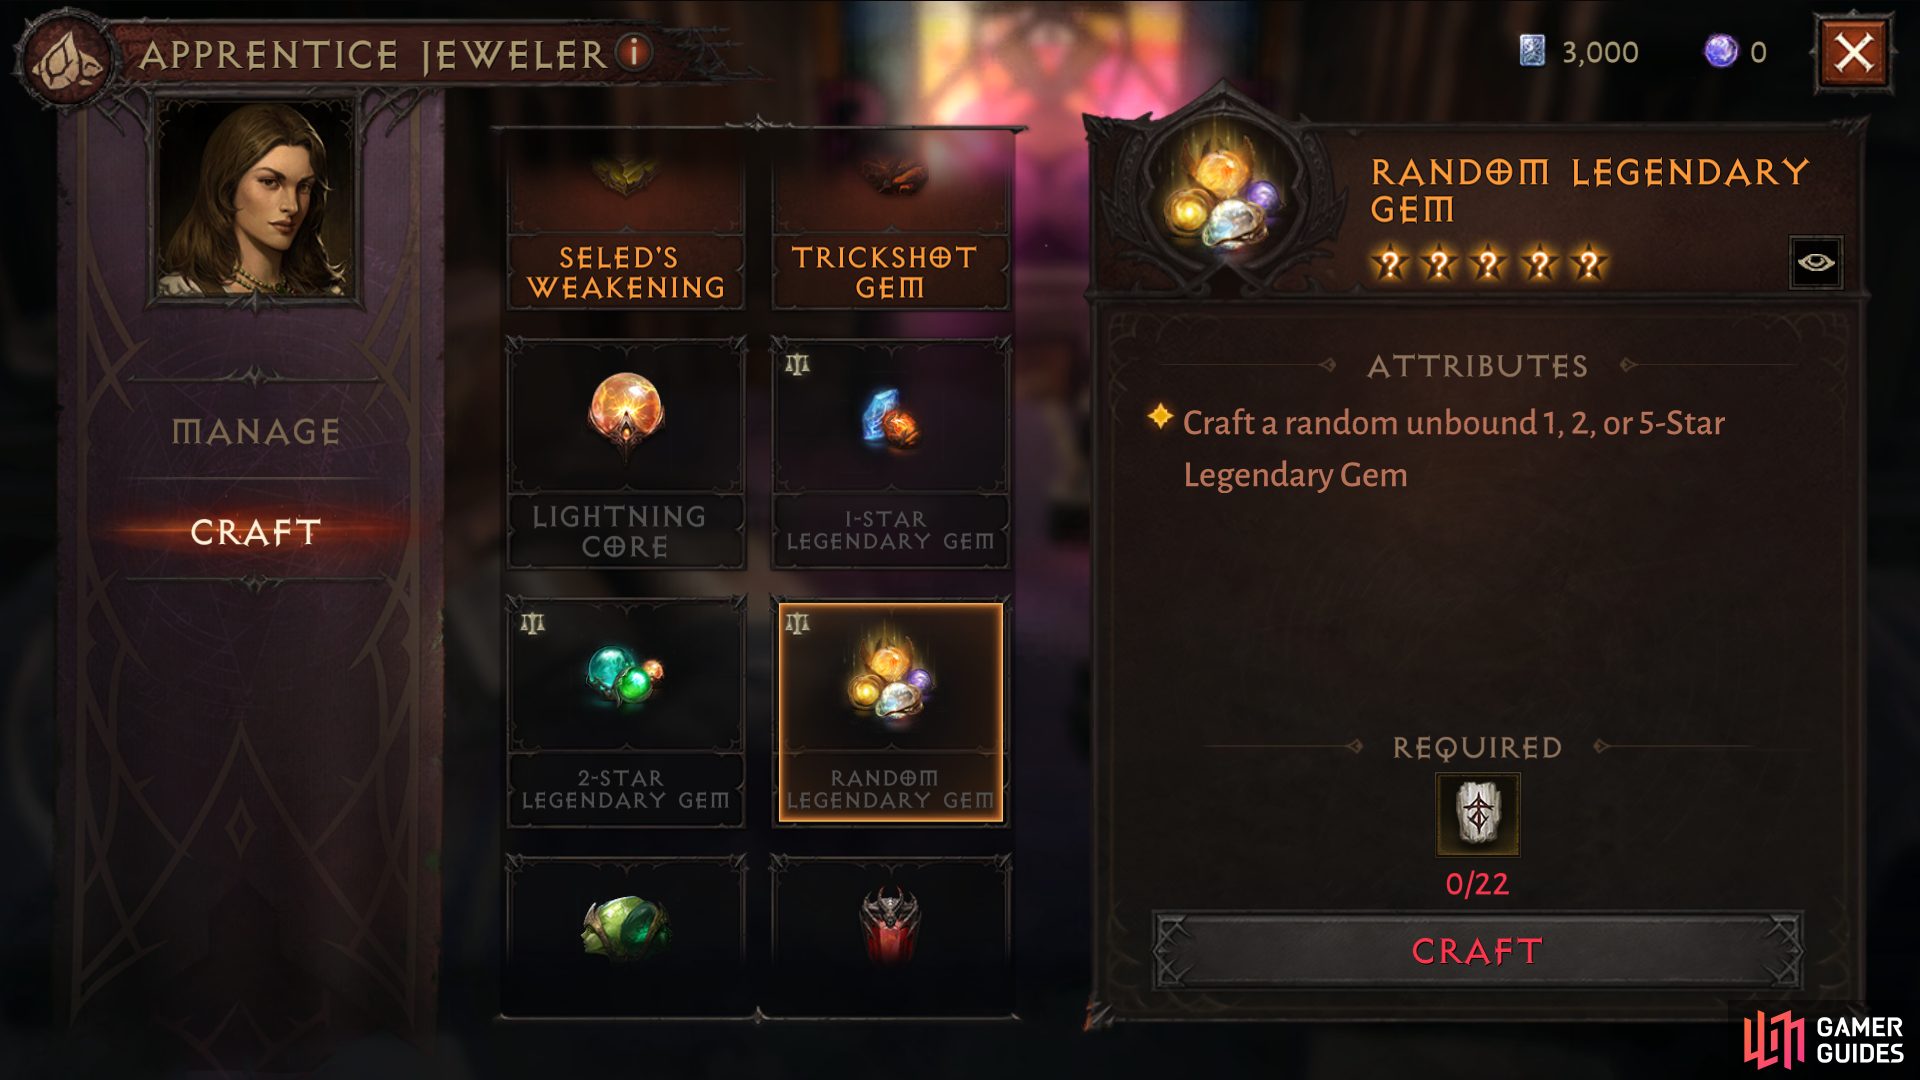 Jewelers will craft Legendary Gems for you provided you bring them the correct runes.